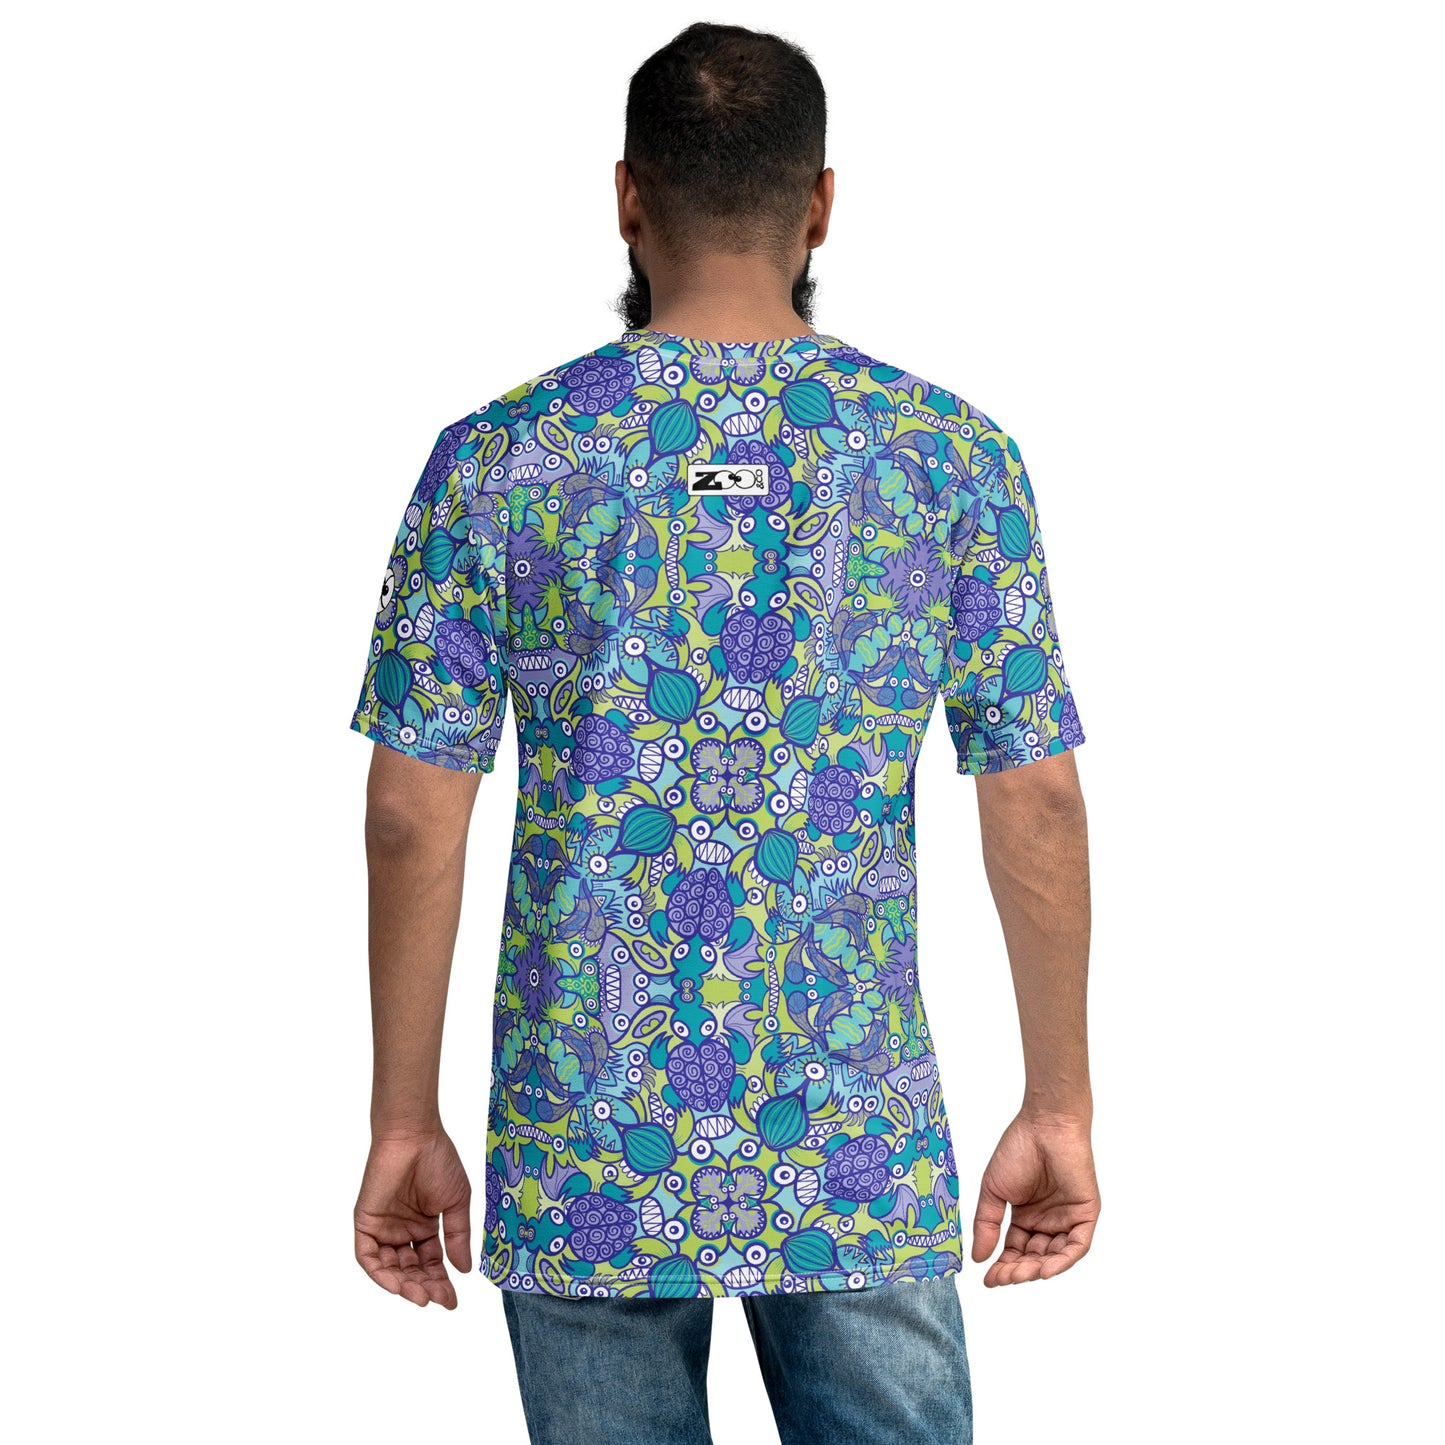 Once upon a time in an ocean full of life Men's t-shirt. Back view